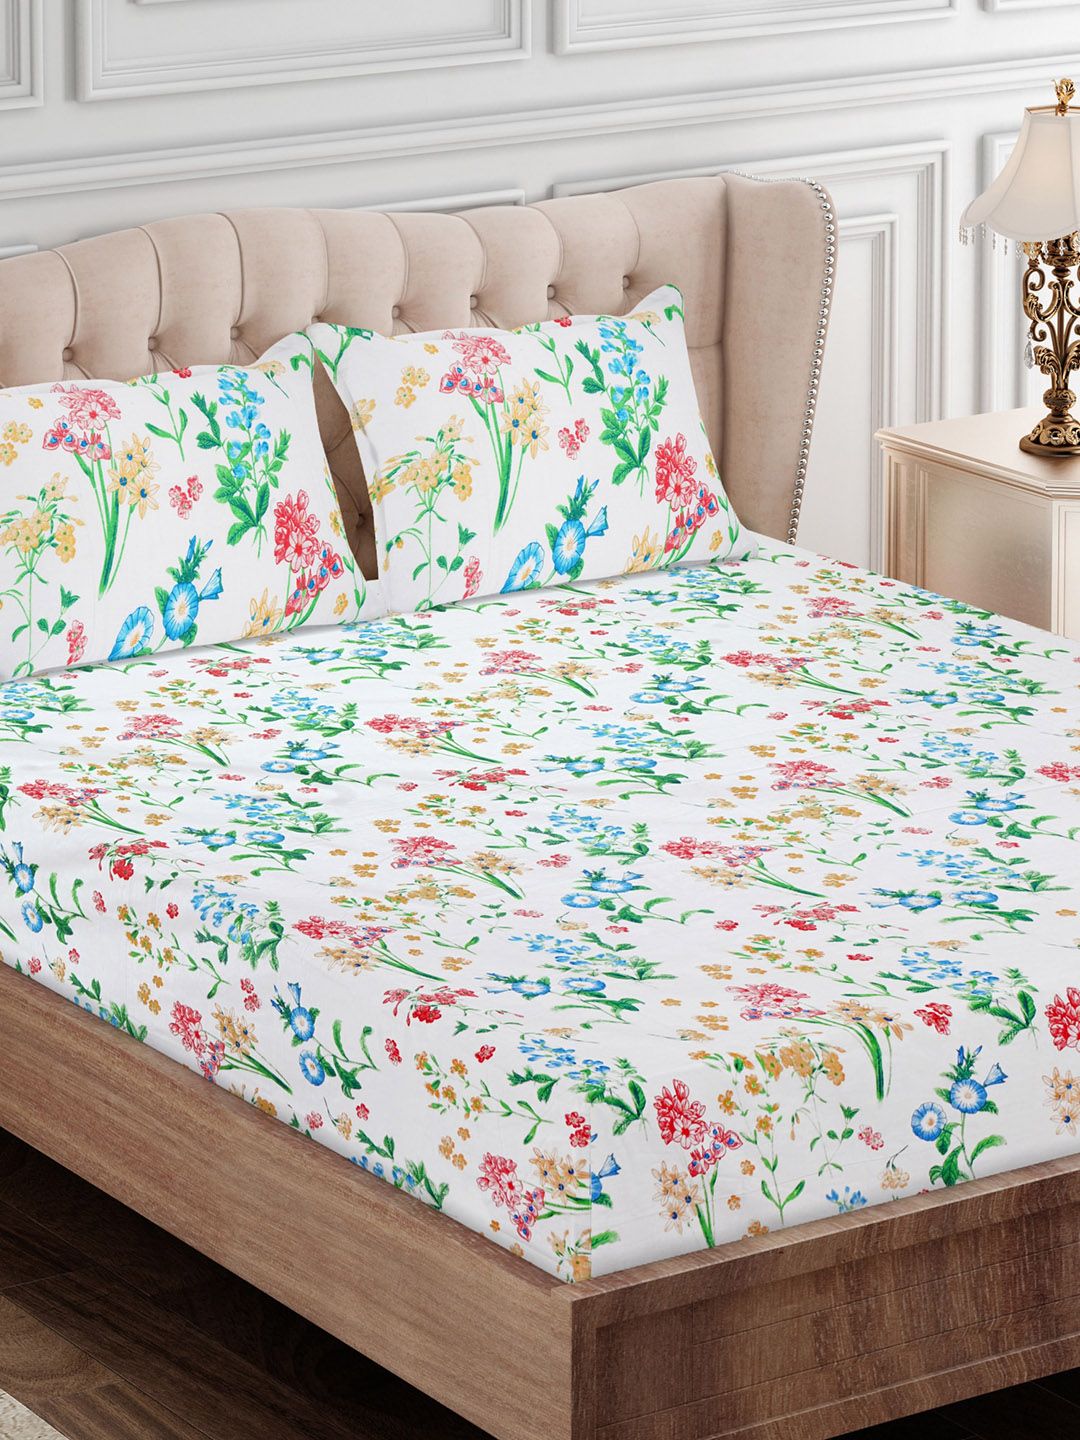 SEJ by Nisha Gupta Blue & Green Floral 180 TC King Bedsheet with 2 Pillow Covers Price in India